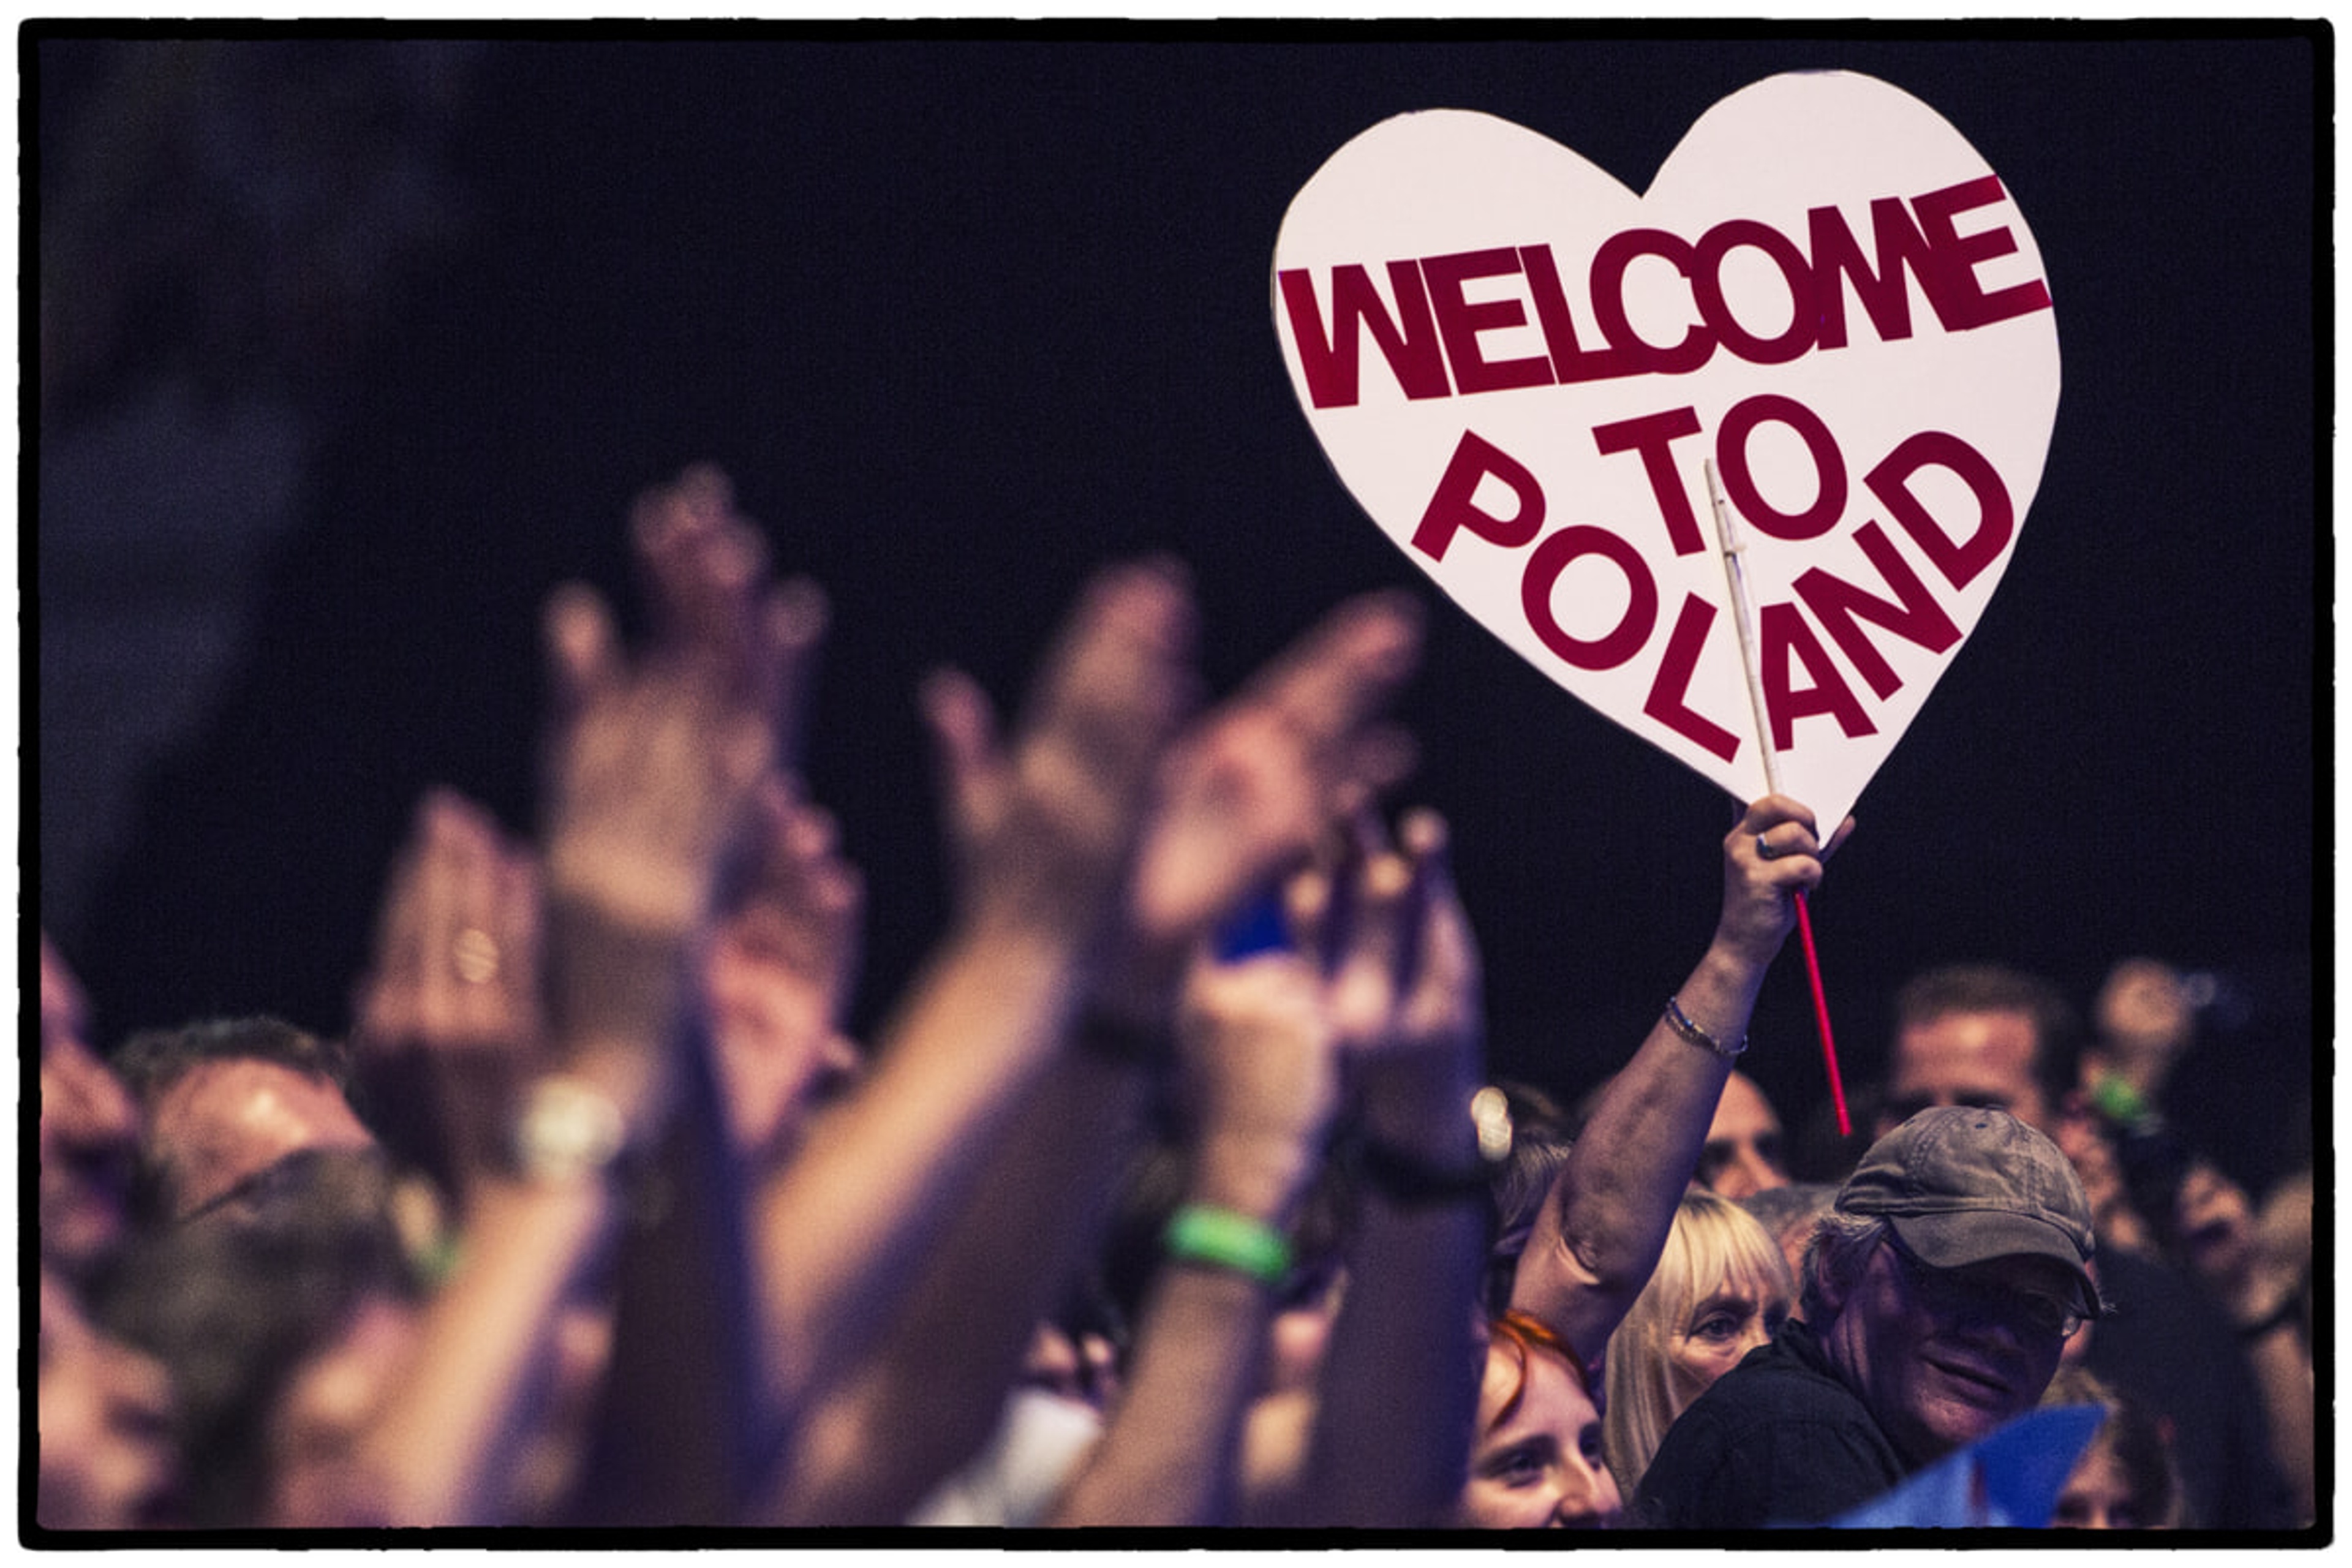 Welcome to Poland, National Stadium, Warsaw, 22nd June 2013